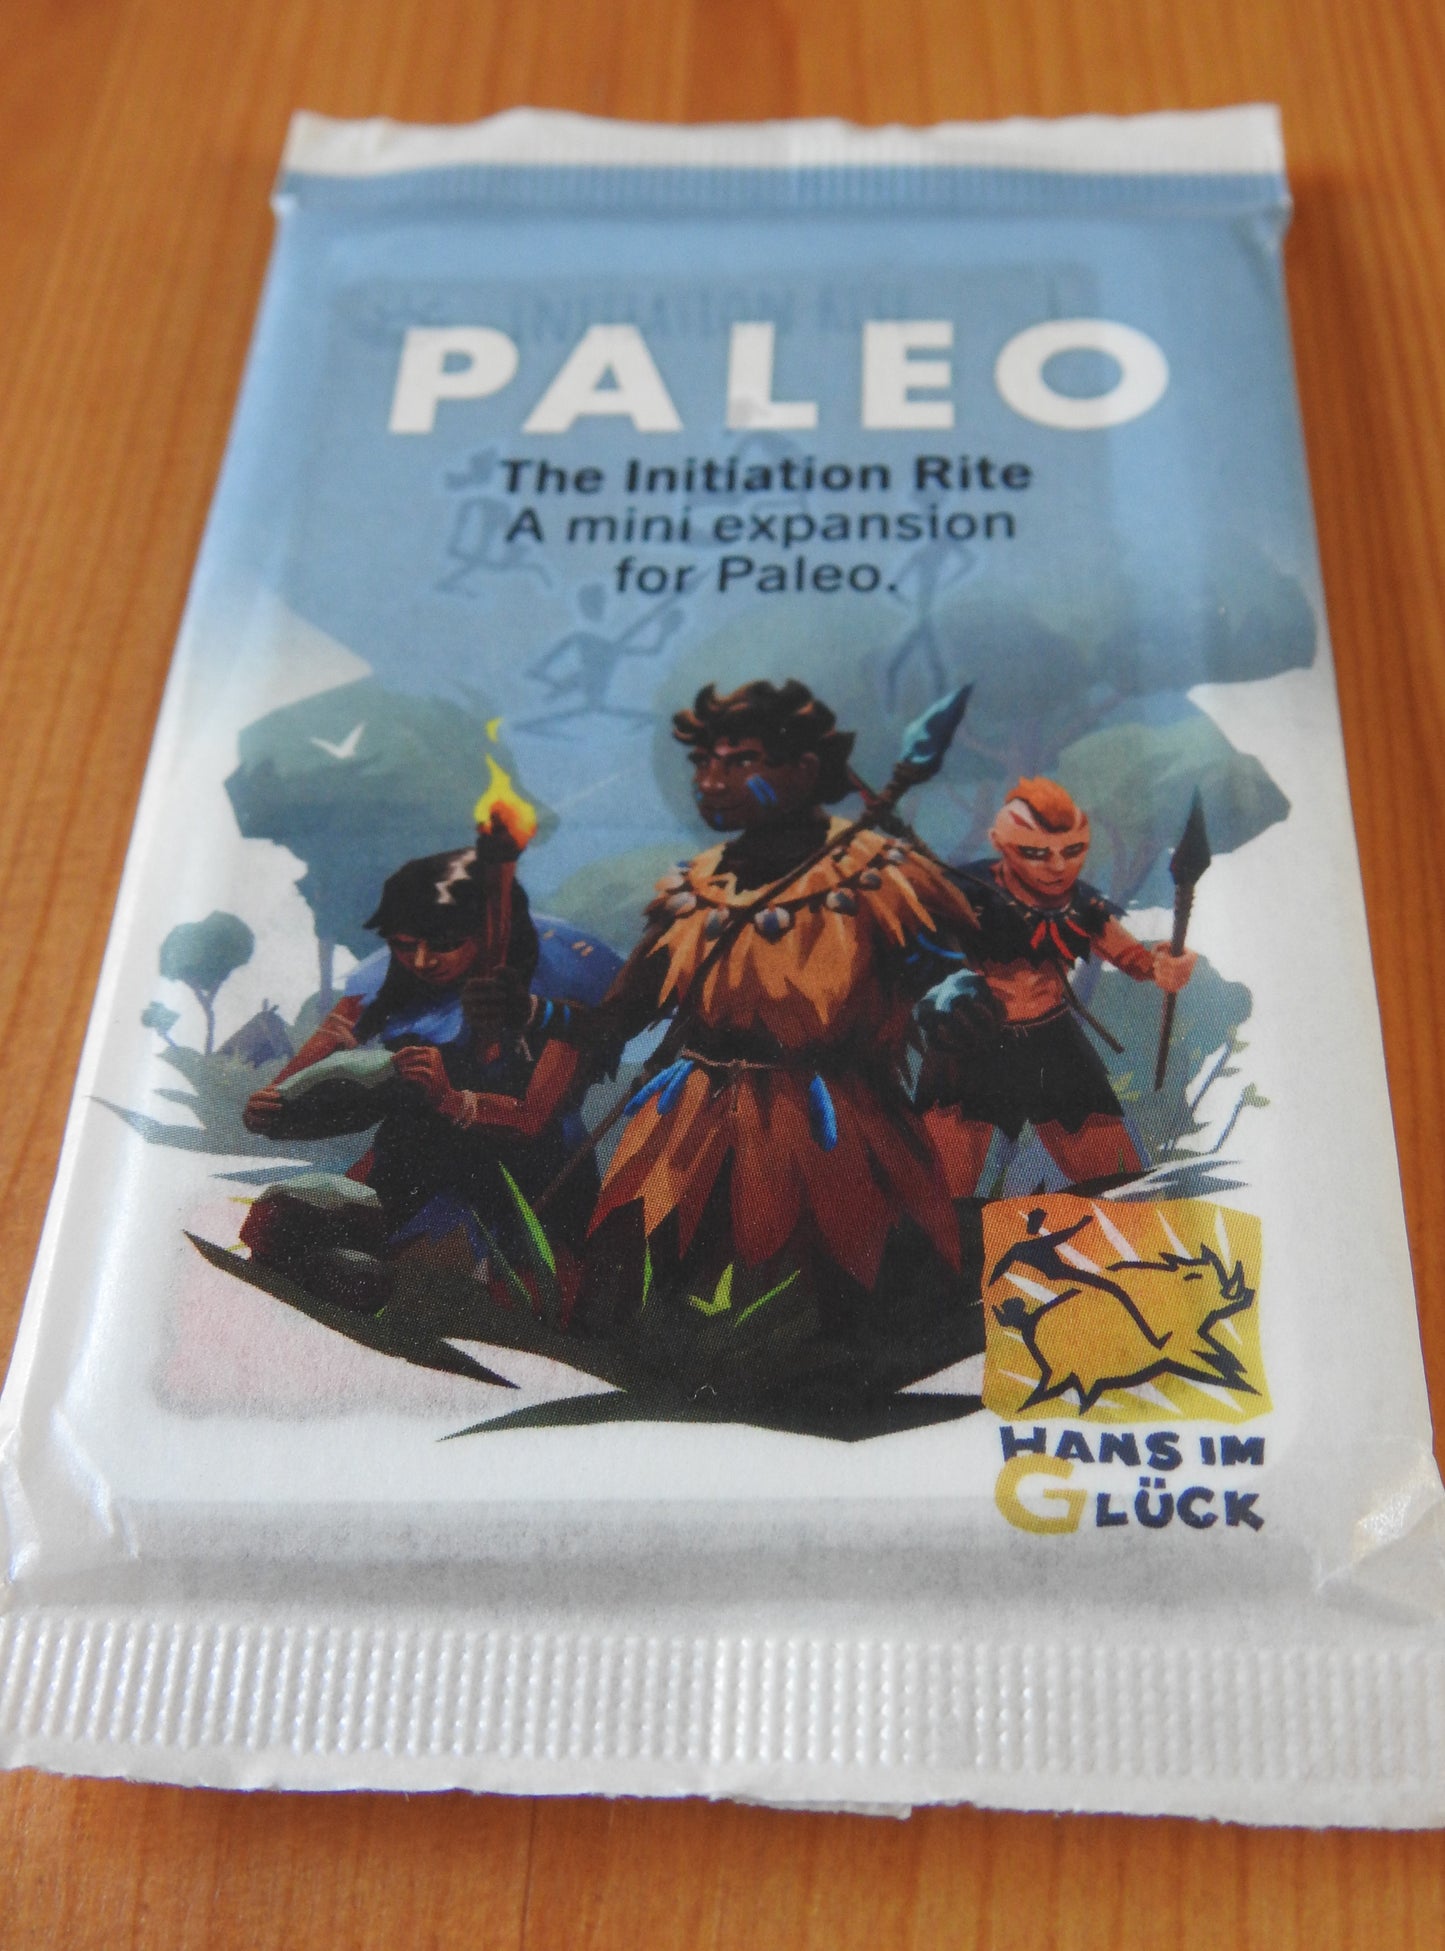 Another view of the front of the deck of cards, with illustrations of some characters featured in this Paleo Initiation Rite mini expansion.